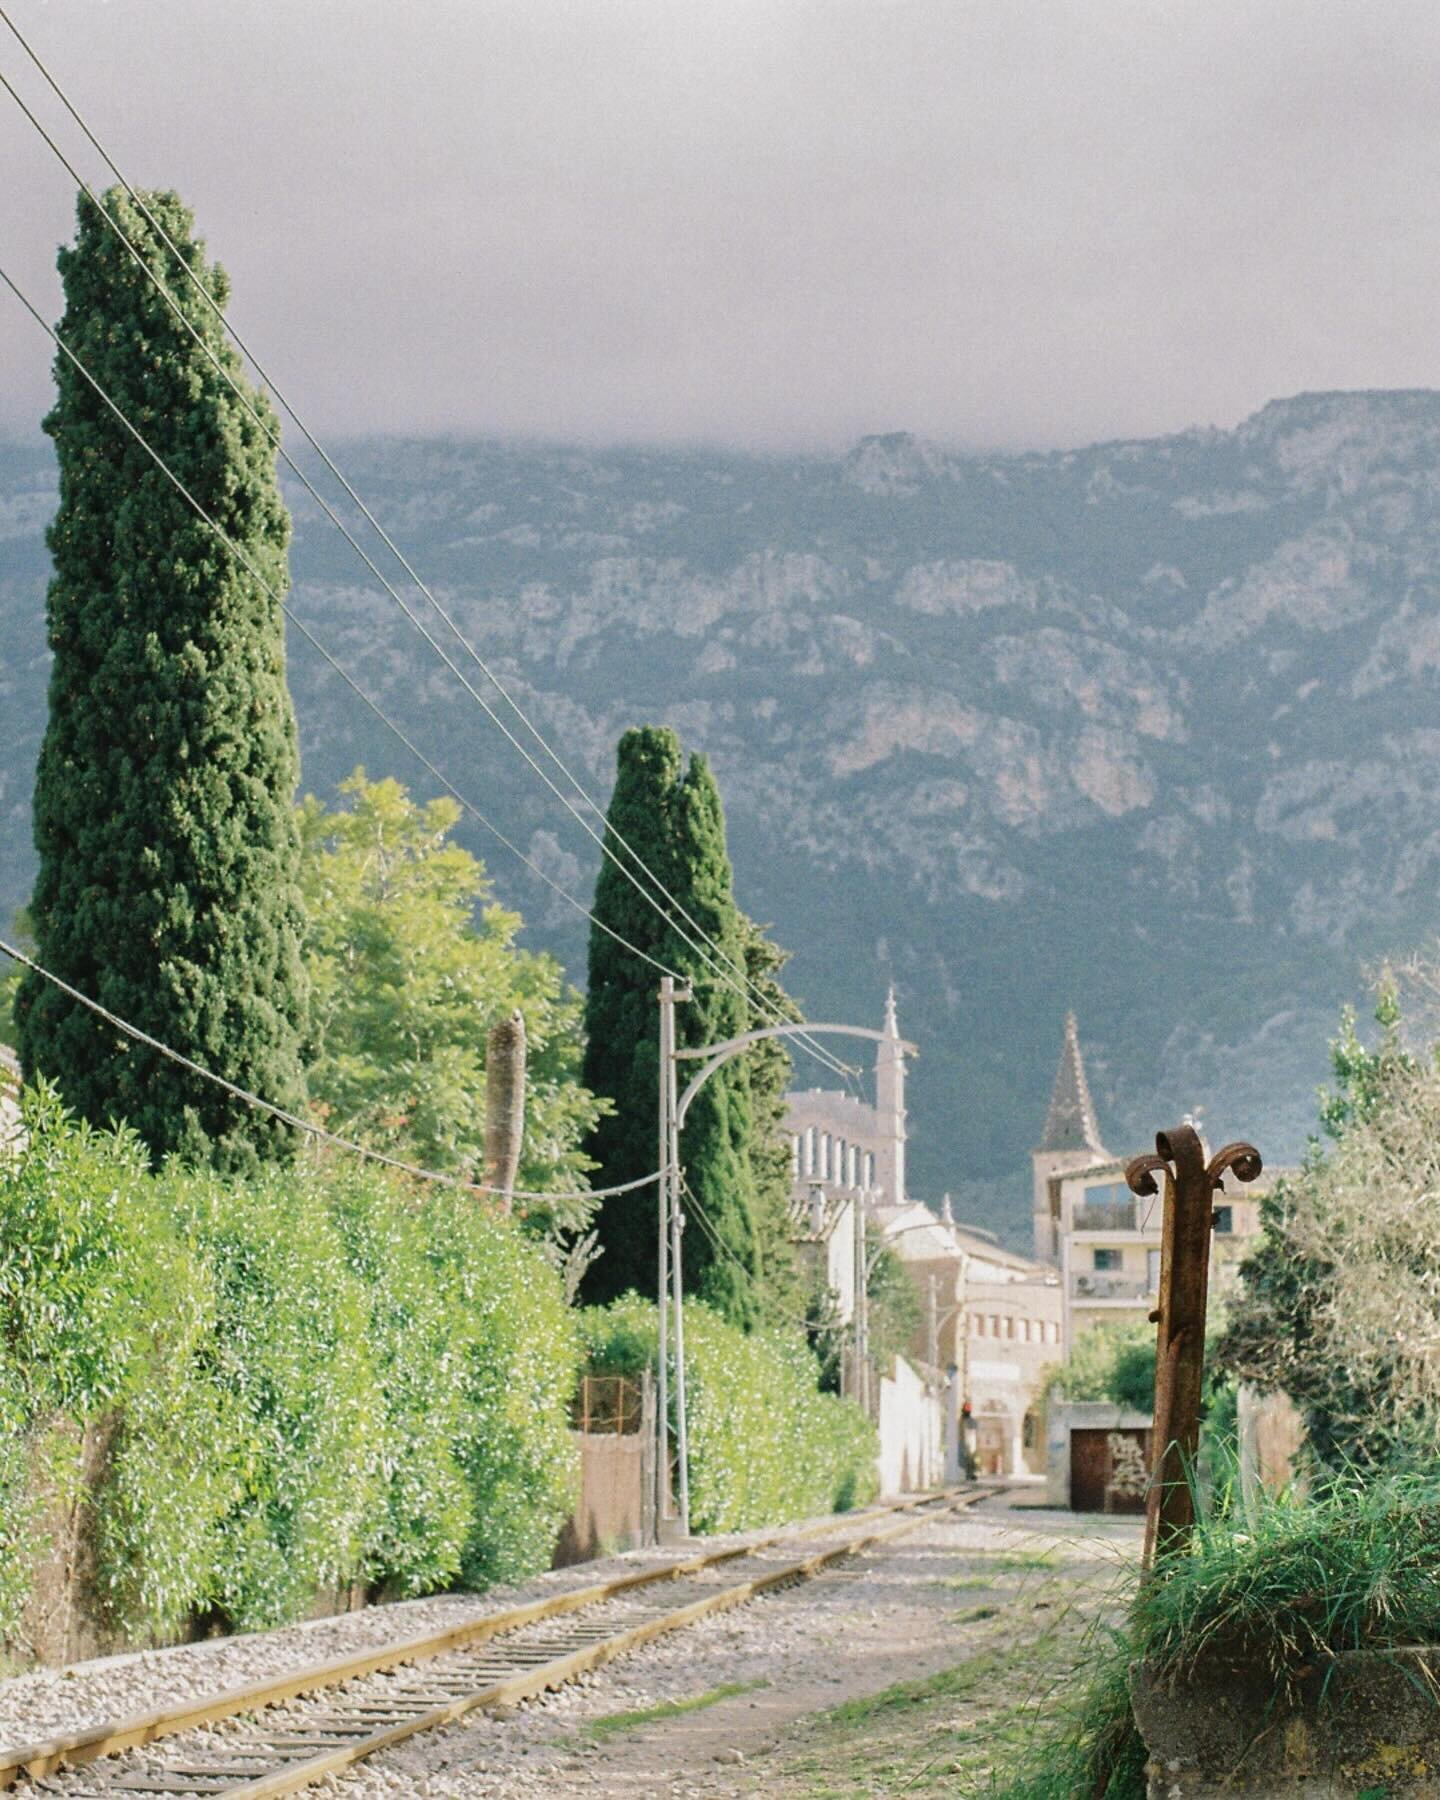 Getting married at a village in the mountainside would be a dream. Peace, quiet and an everlasting haze. 

#mallorca #valdemossa #deia #meditteranean #slowliving #bridalinspo #destinationwedding